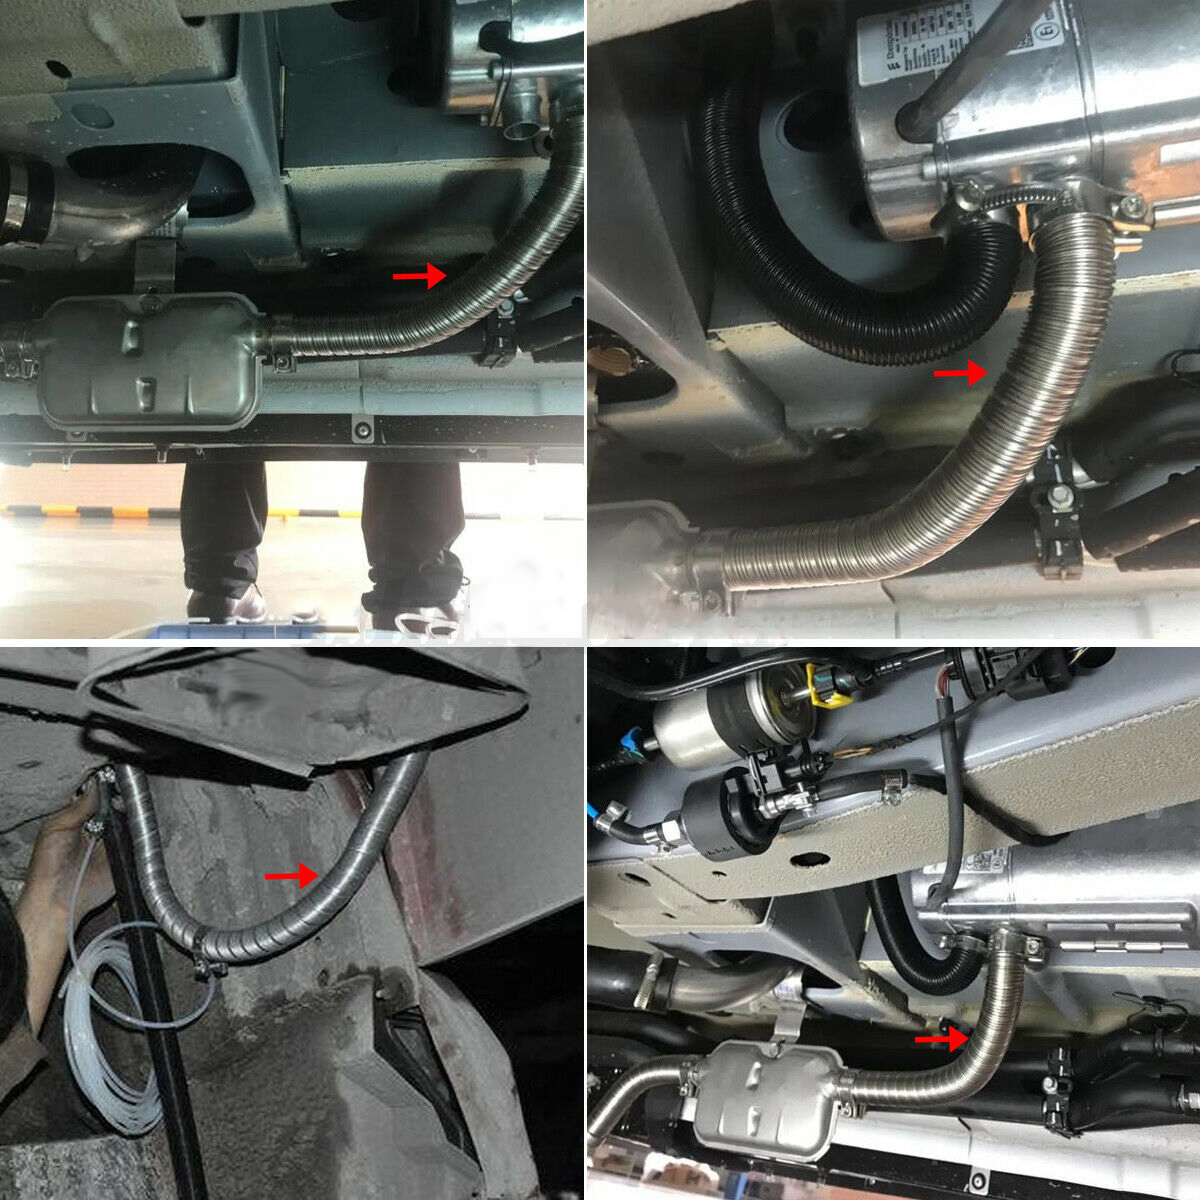 Stainless-Exhaust-Muffler-Silencer-Clamps-Bracket-Gas-Vent-Hose-Portable-180cm-Pipe-Silence-For-Air--1695770-3